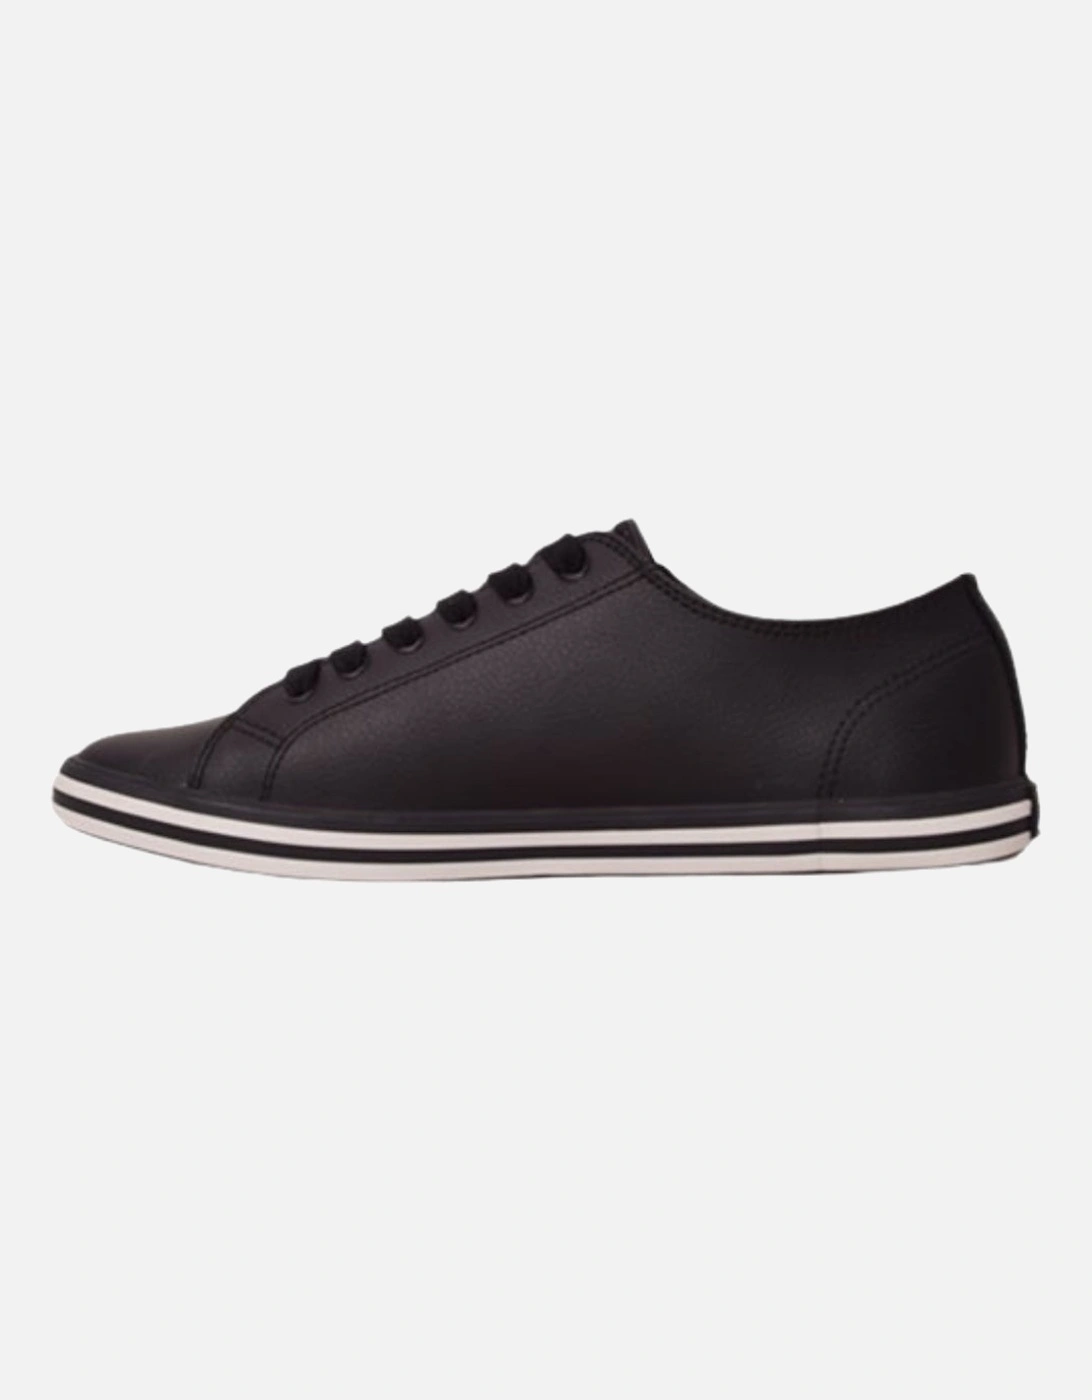 Kingston Leather B7163 184 Mens Trainers